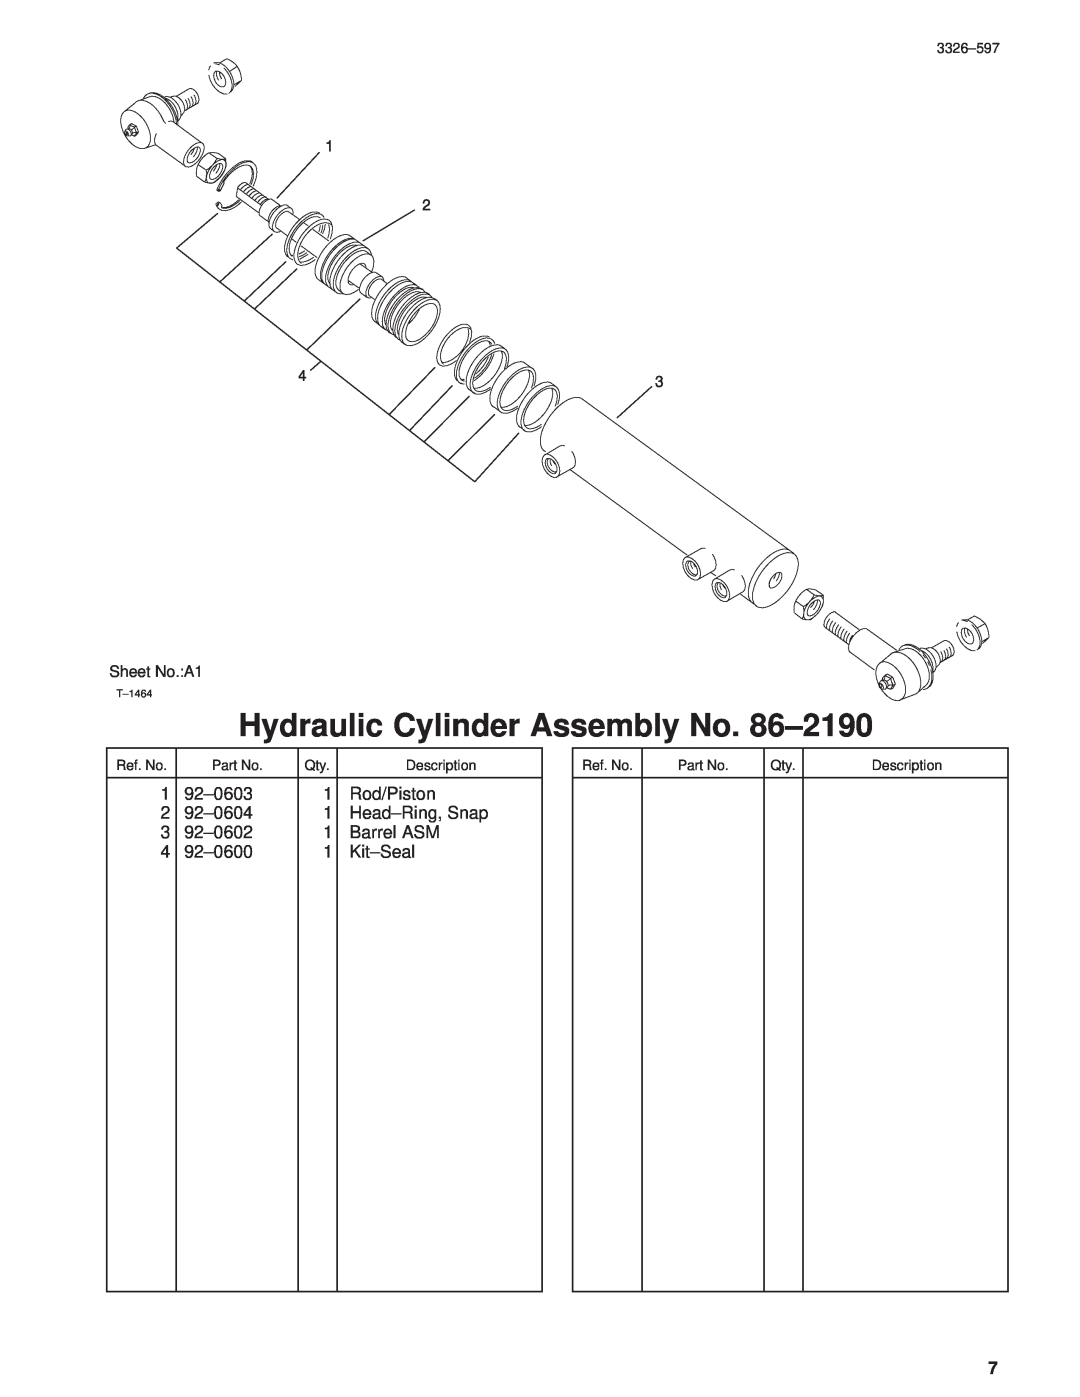 Toro 30402210000001 and Up manual Hydraulic Cylinder Assembly No. 86±2190, 3326±597, Ref. No, Description, T±1464 